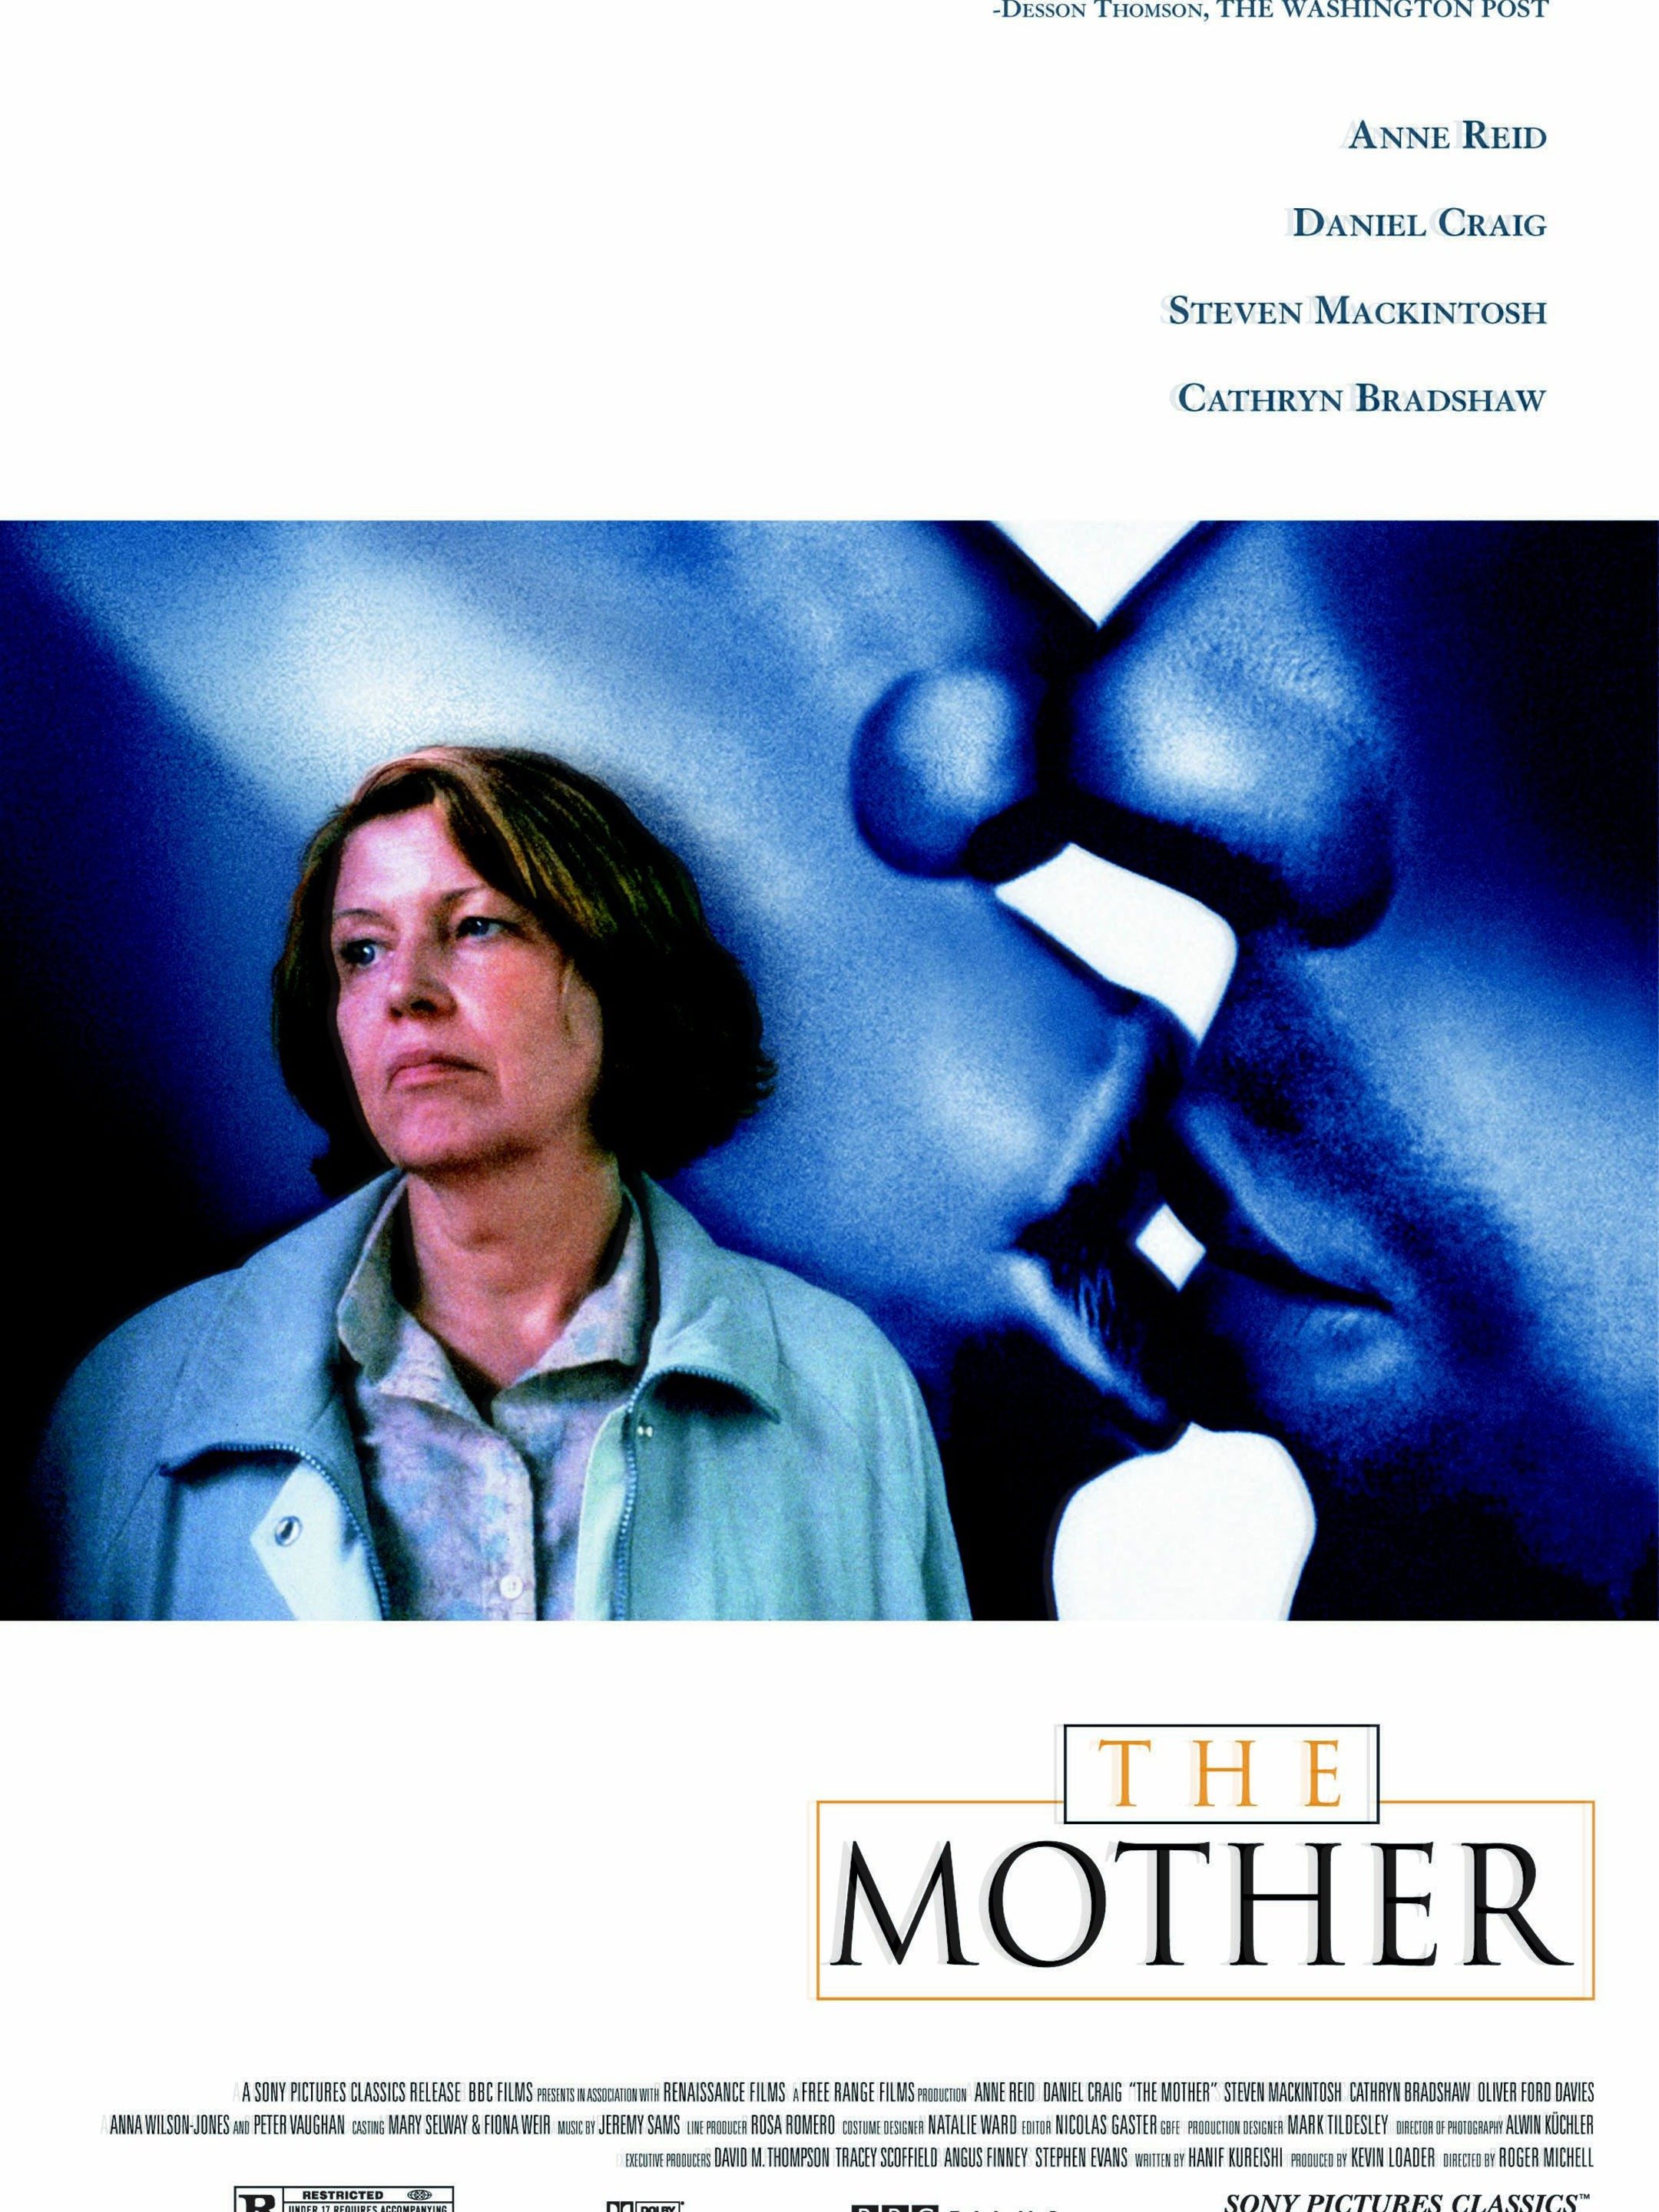 The Mother photo